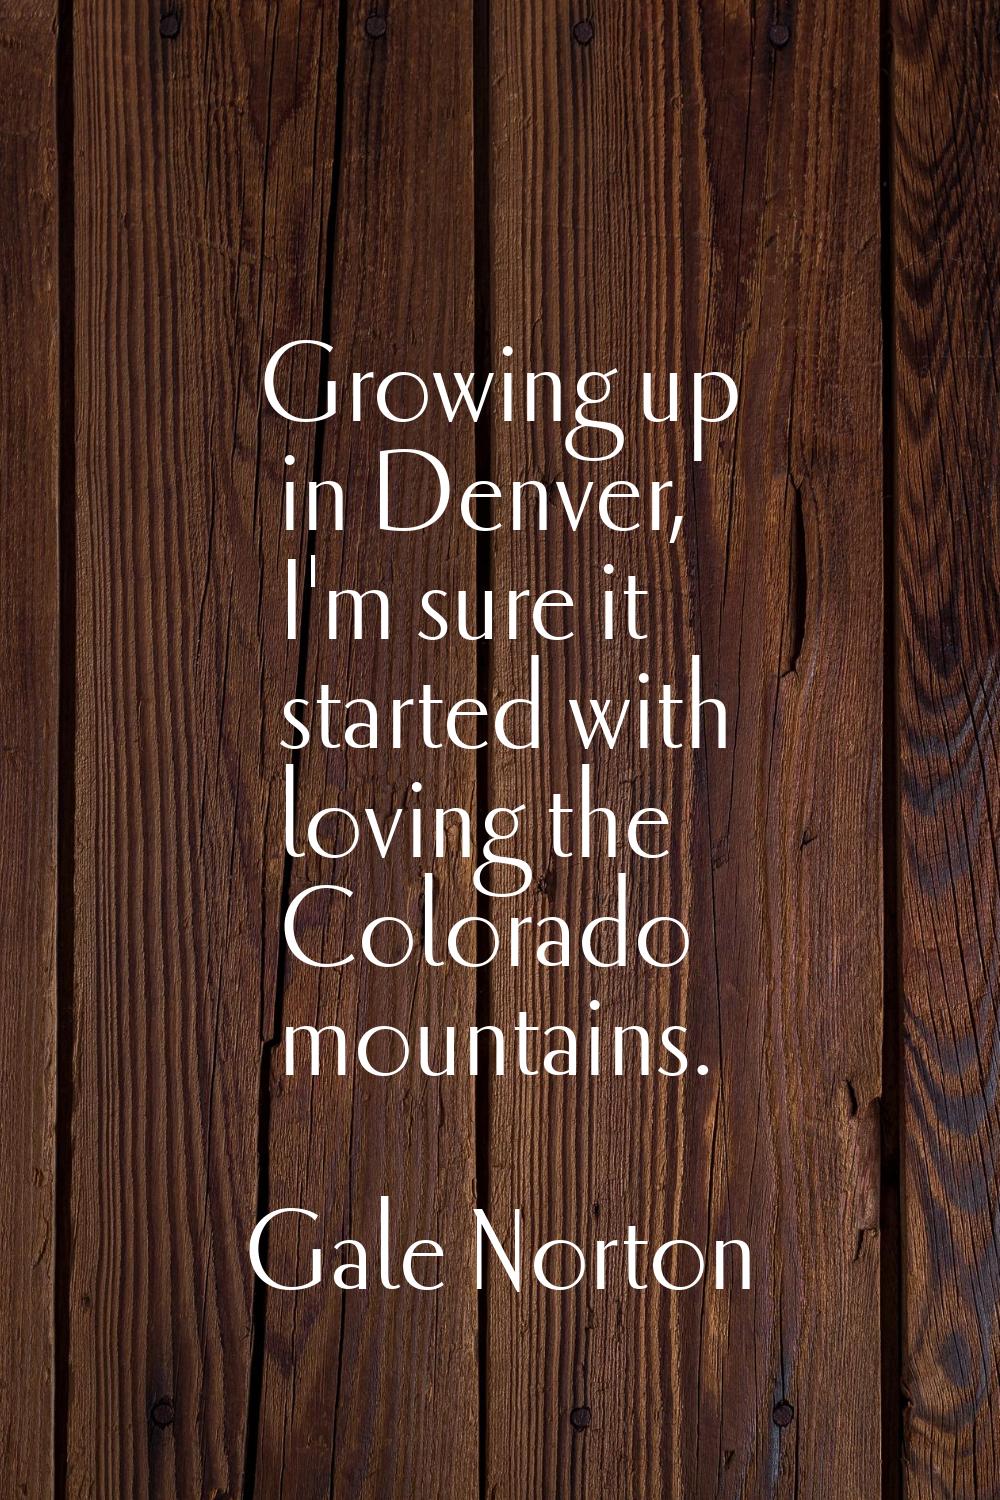 Growing up in Denver, I'm sure it started with loving the Colorado mountains.